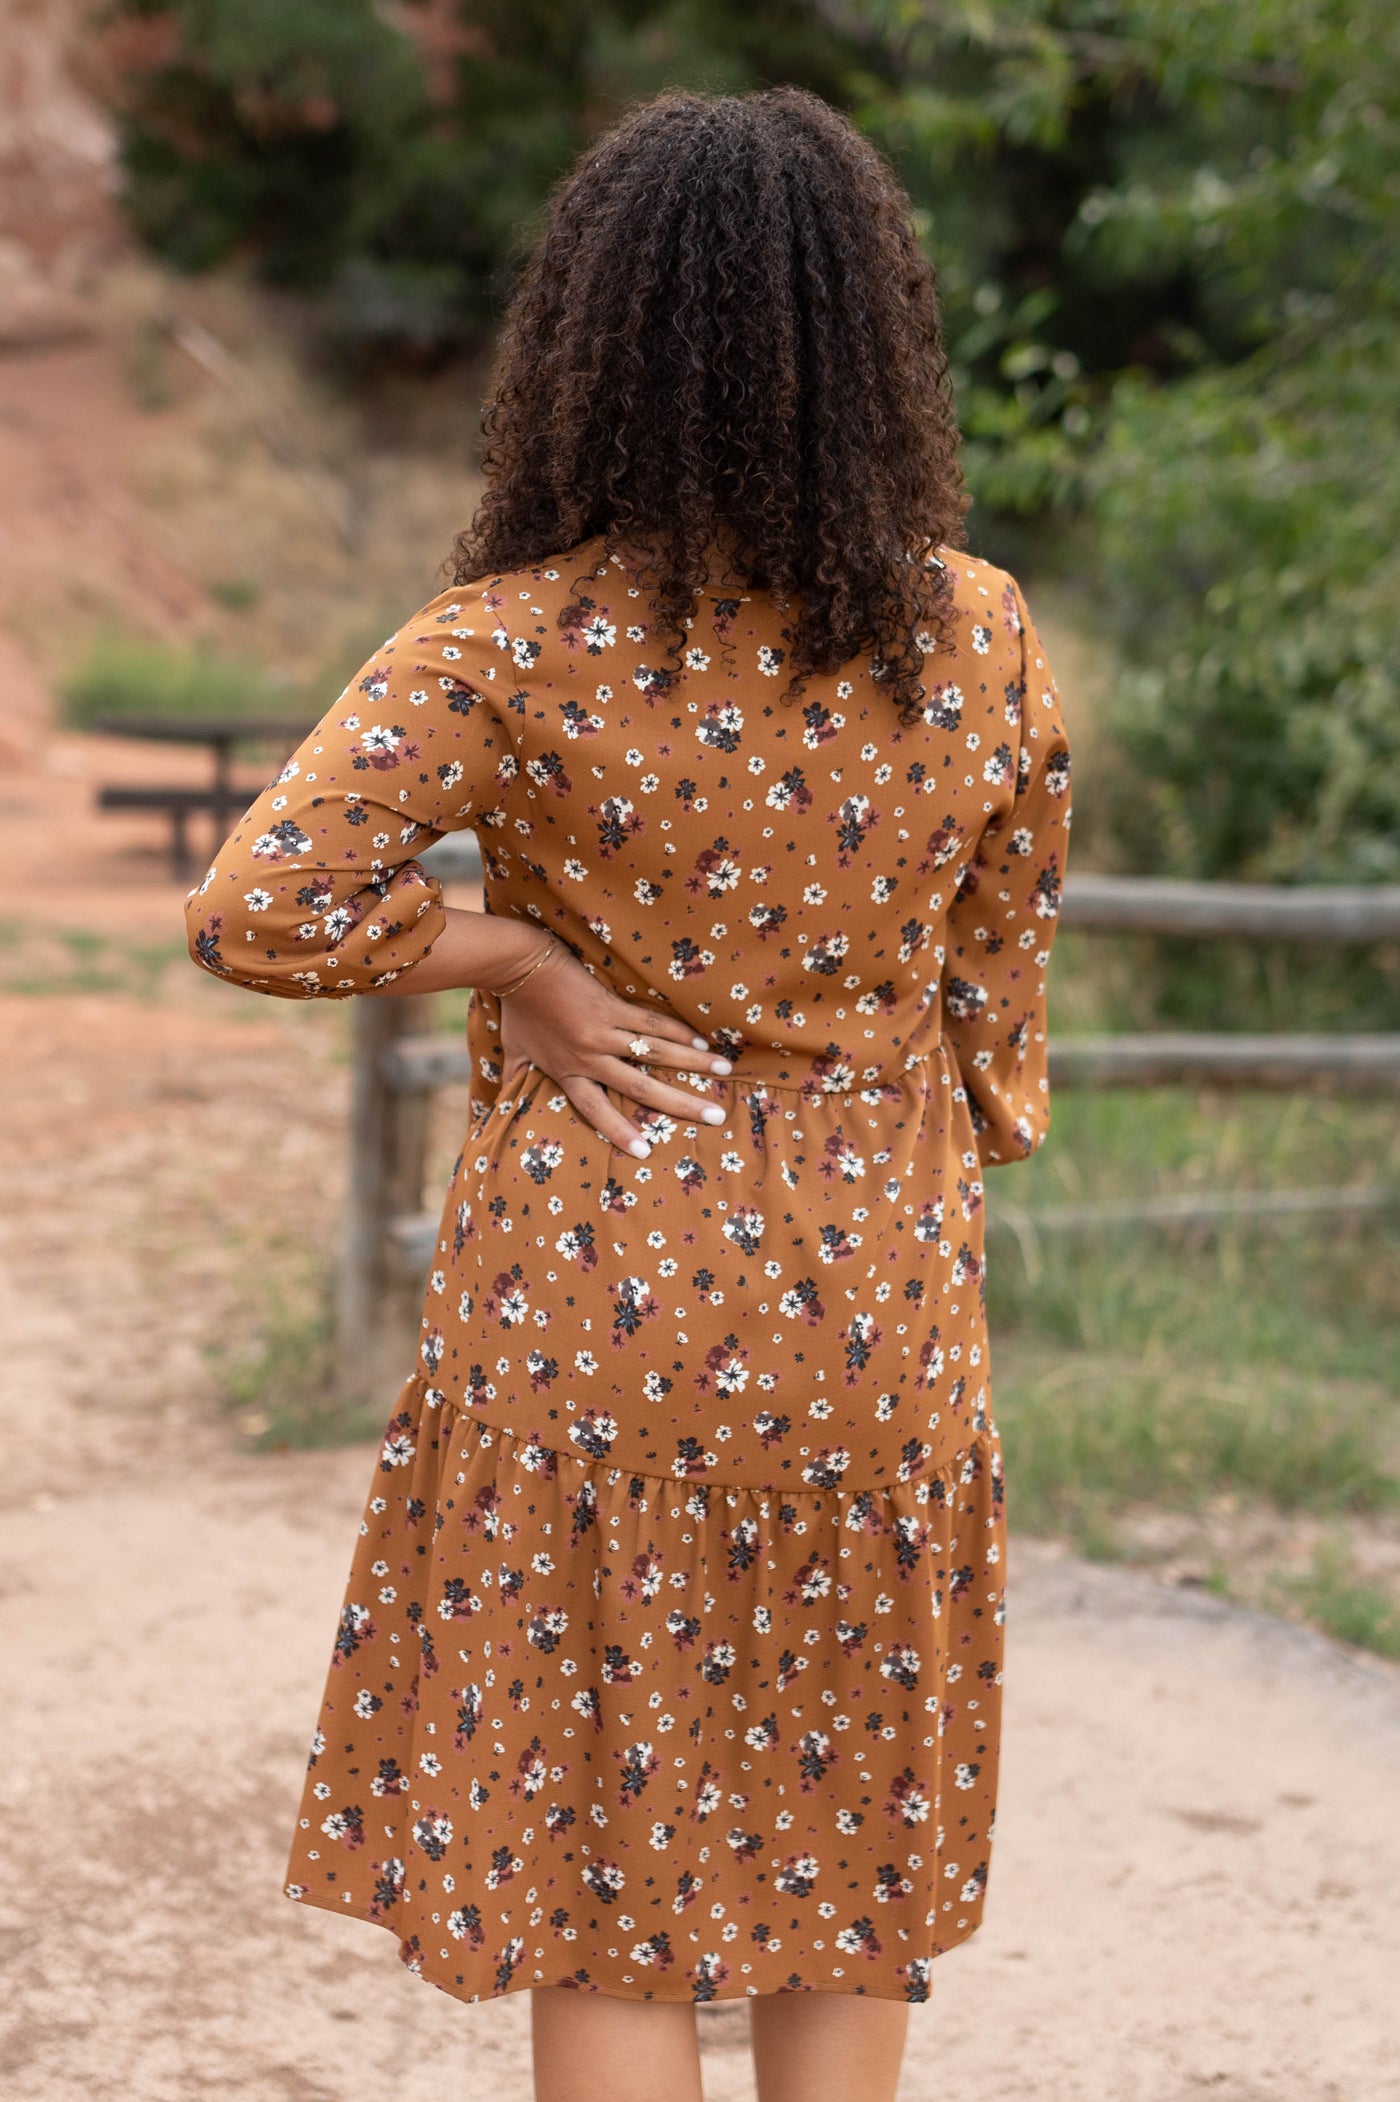 Back view of the camel dress